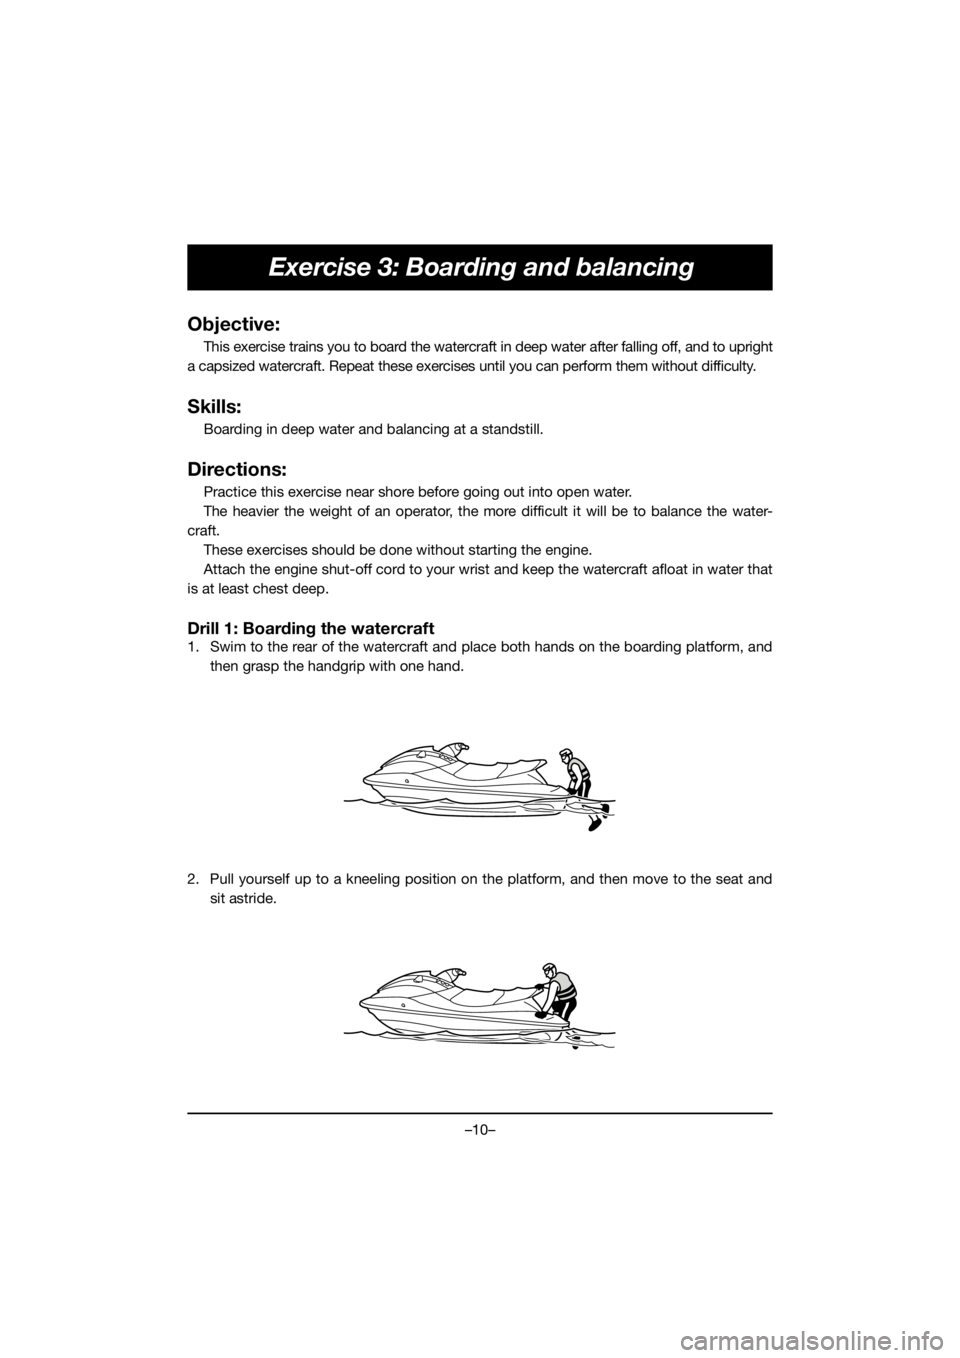 YAMAHA EX SPORT 2020  Notices Demploi (in French) –10–
Exercise 3: Boarding and balancing
Objective:
This exercise trains you to board the watercraft in deep water after falling off, and to upright
a capsized watercraft. Repeat these exercises un